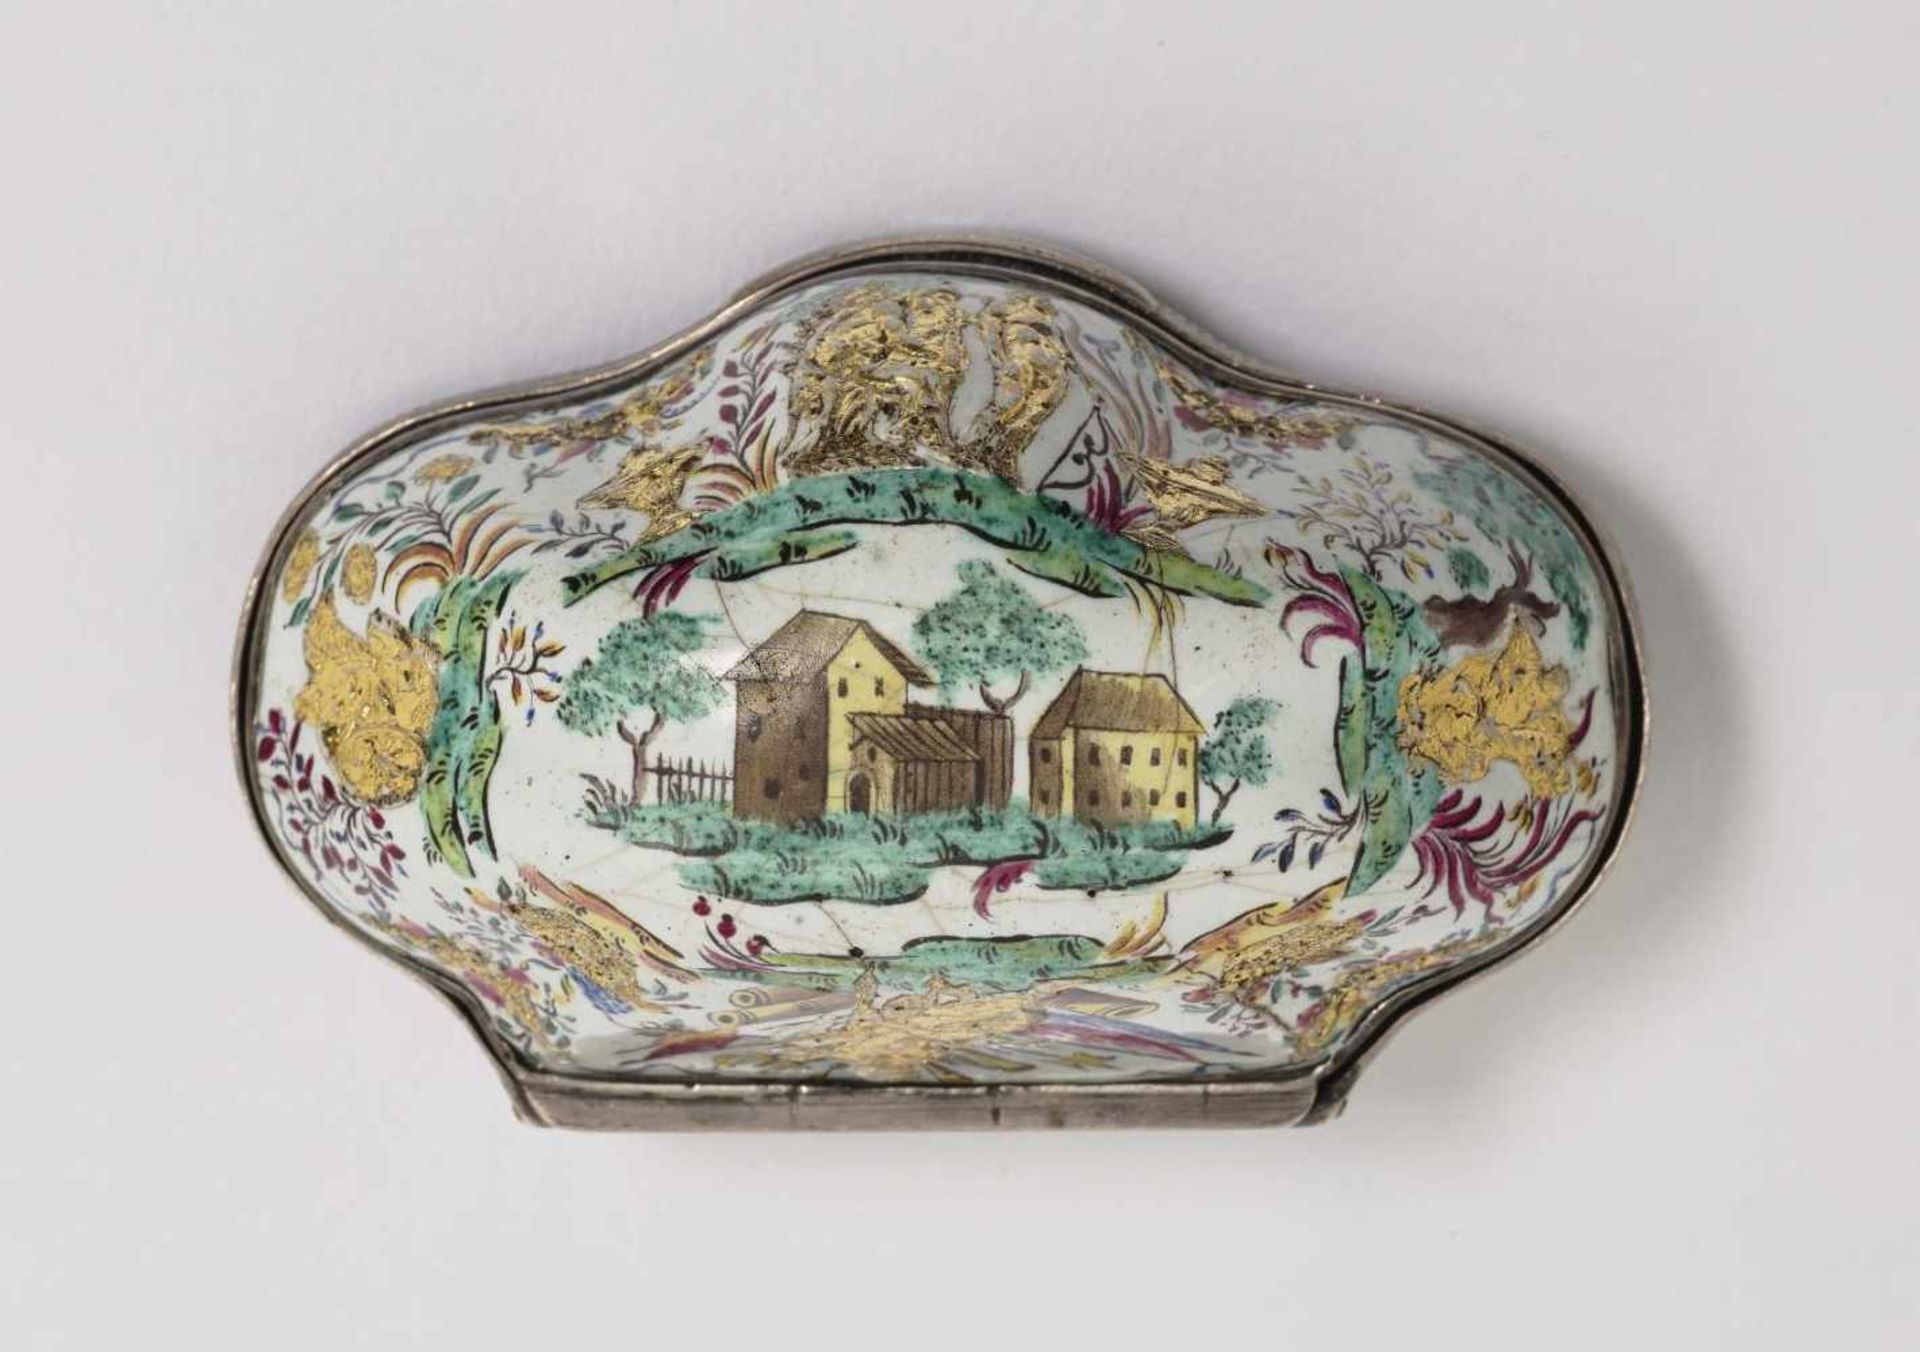 A Snuff BoxBerlin or Meißen, 2nd third of the 18th Century, probably workshop of Fromery 'Email de - Bild 3 aus 3